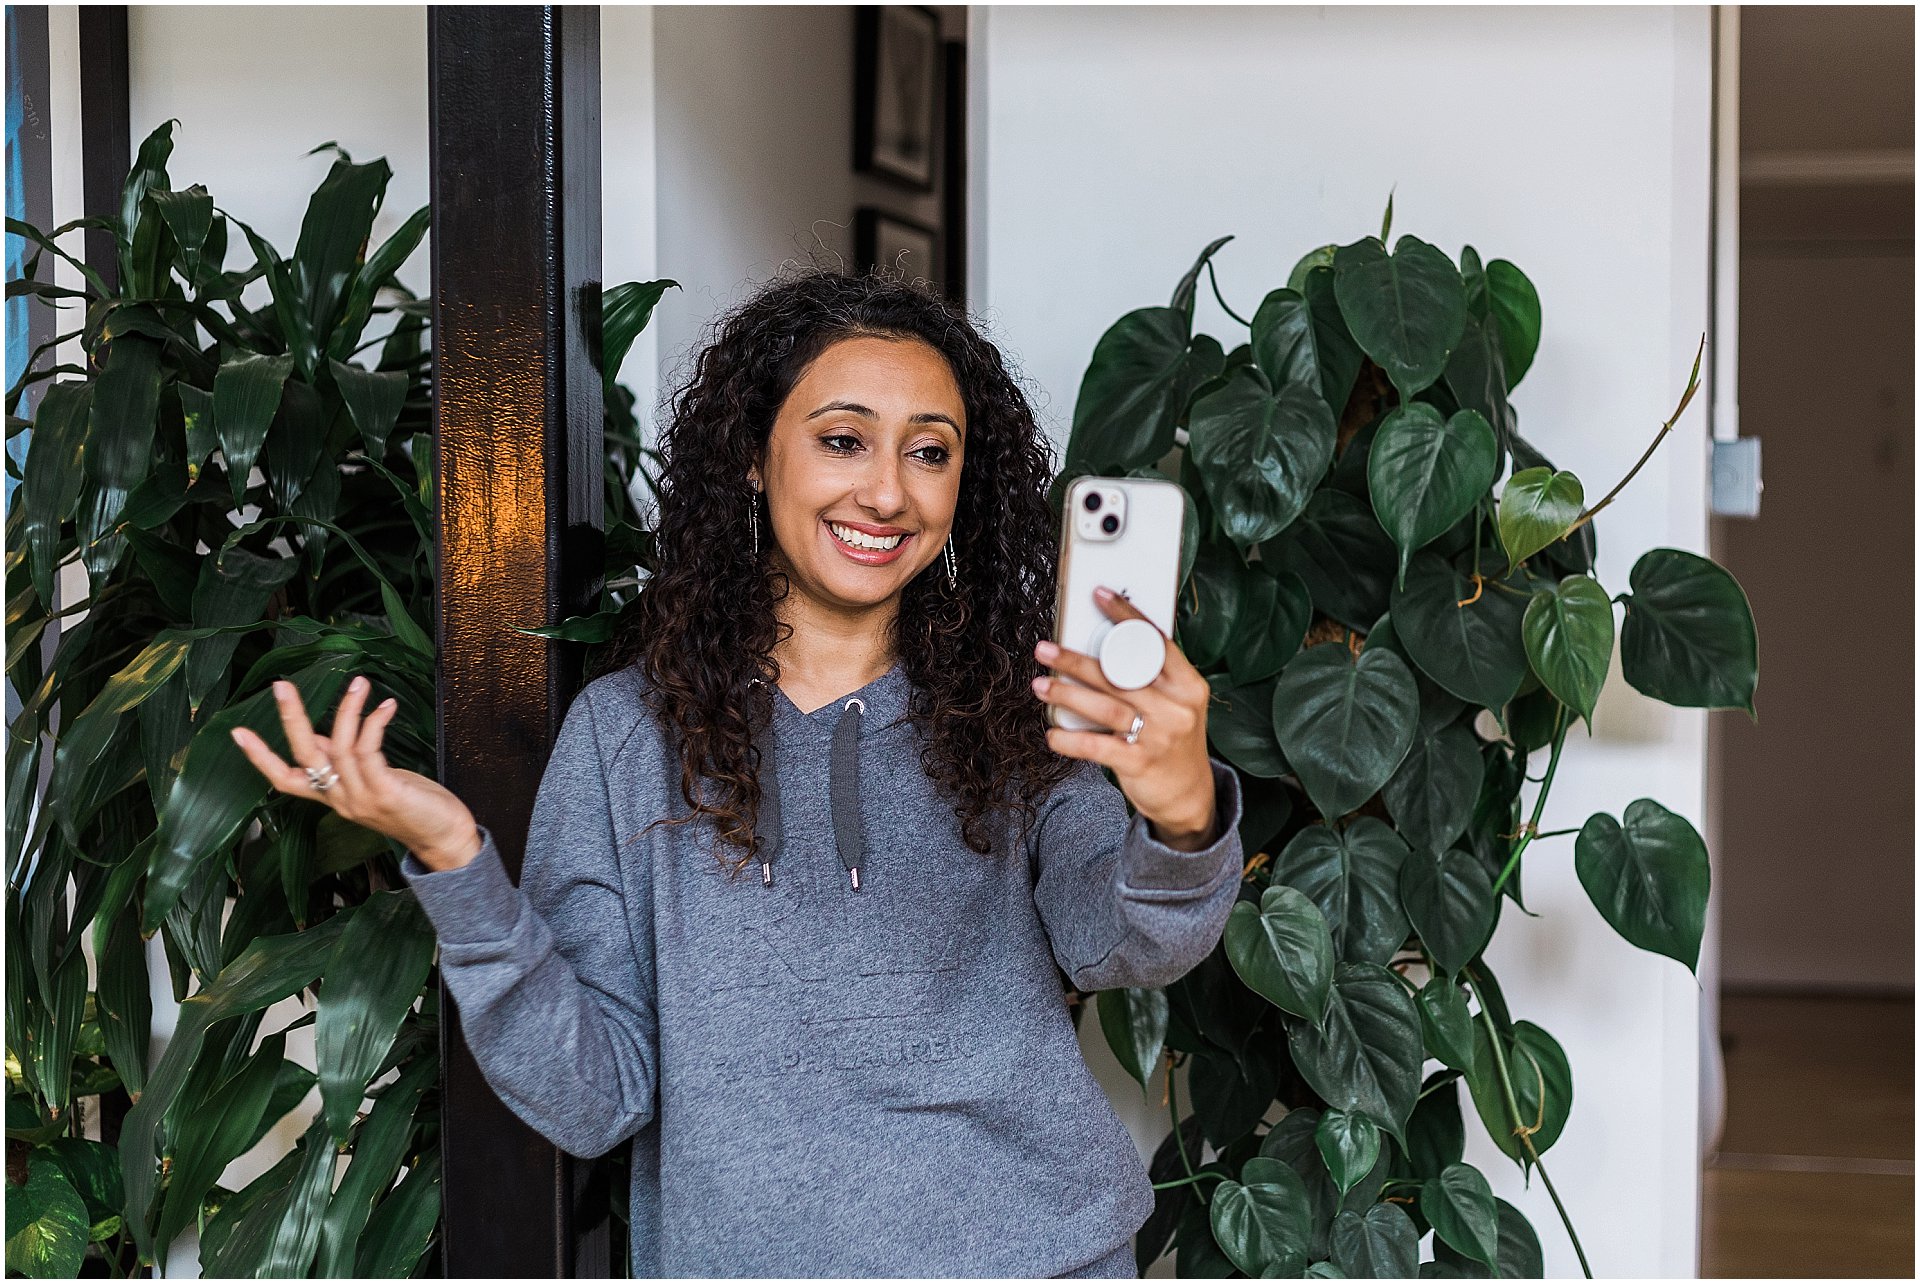 Smiling Asian woman with curly hair taking a selfie, wearing a casual grey hoodie, standing next to a lush green indoor plant, with a black door frame and interior decor in the background

Image by London brand photographer AKP Branding Stories for the blog post "Brand photography on a budget"